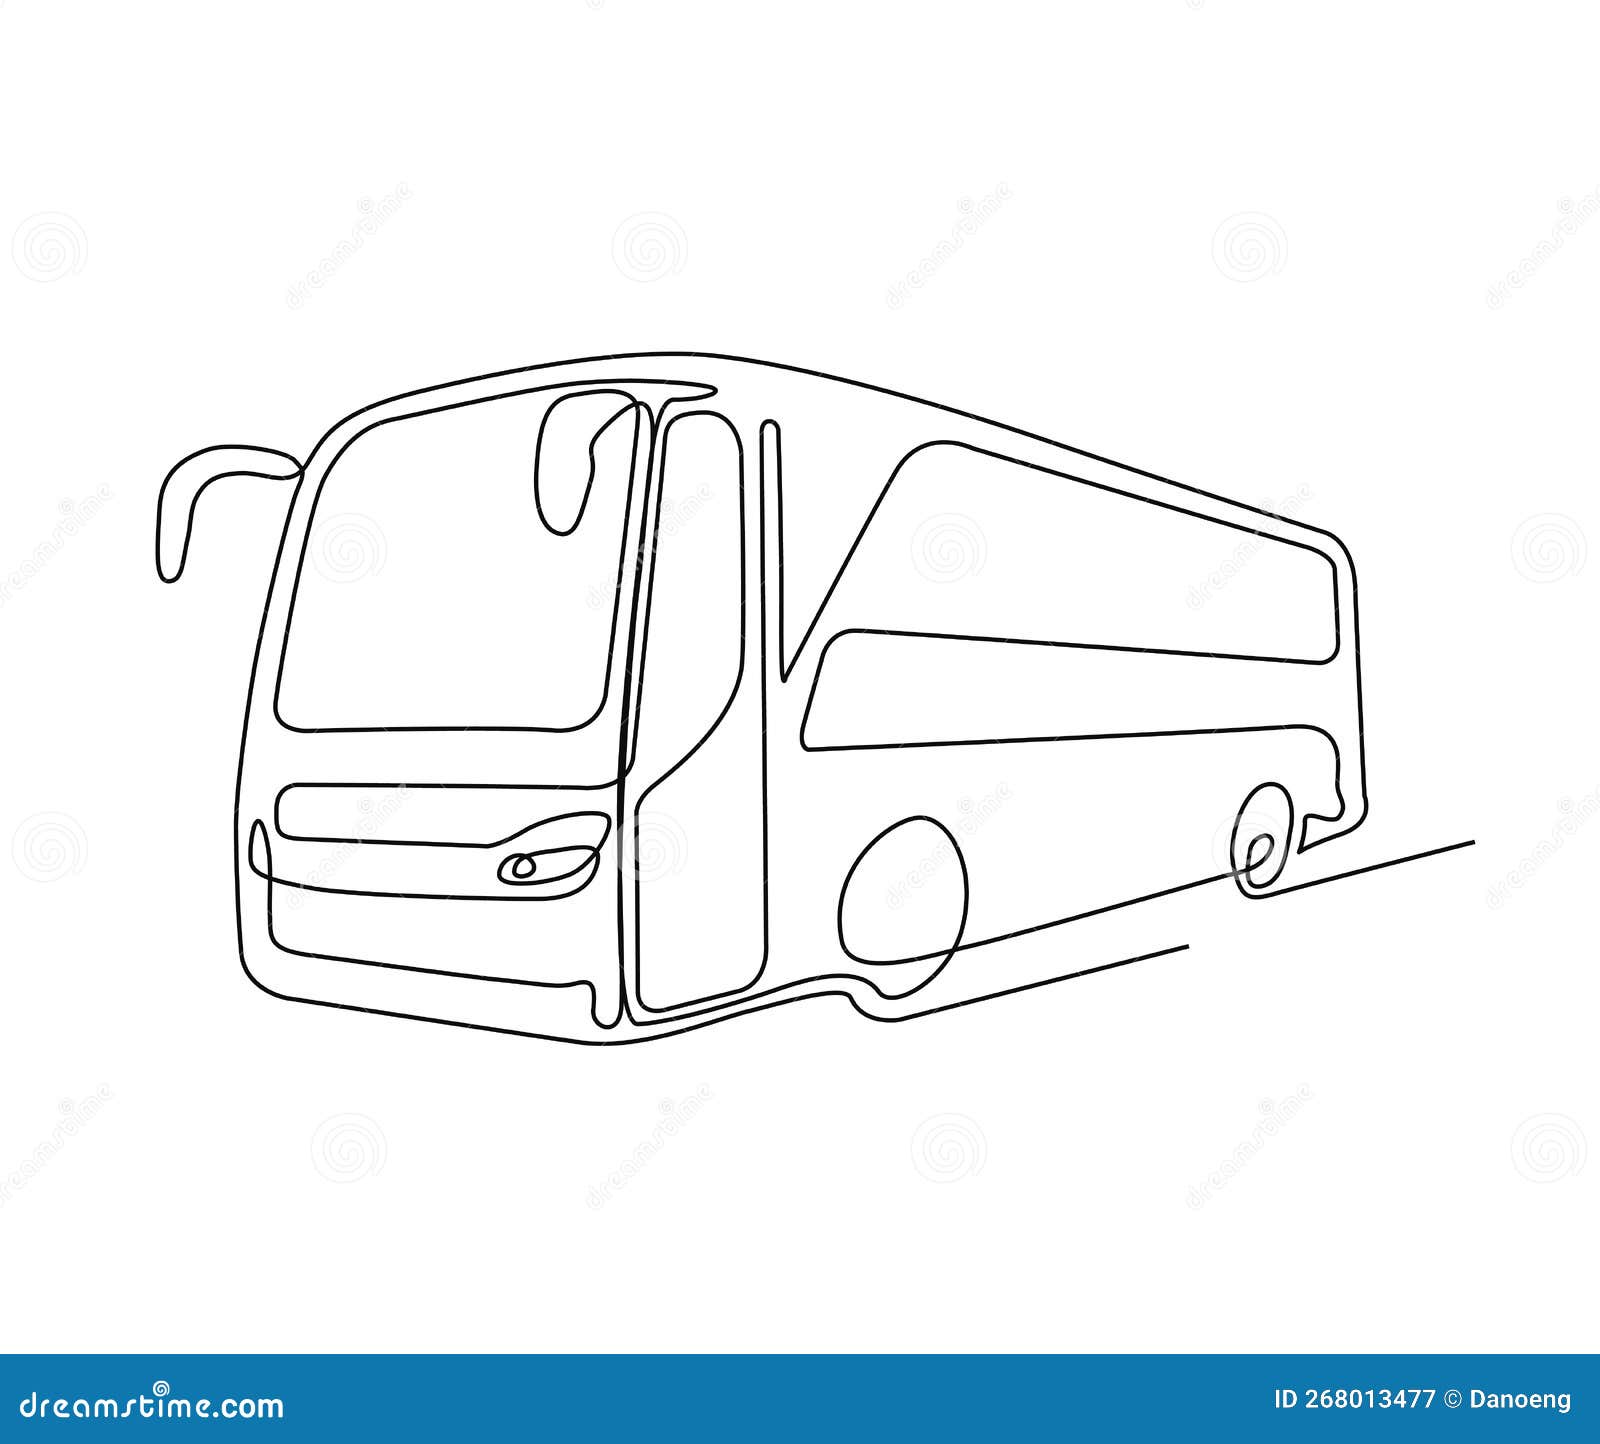 Easy How to Draw a School Bus Tutorial and School Bus Coloring Page |  School bus art, School bus drawing, School bus